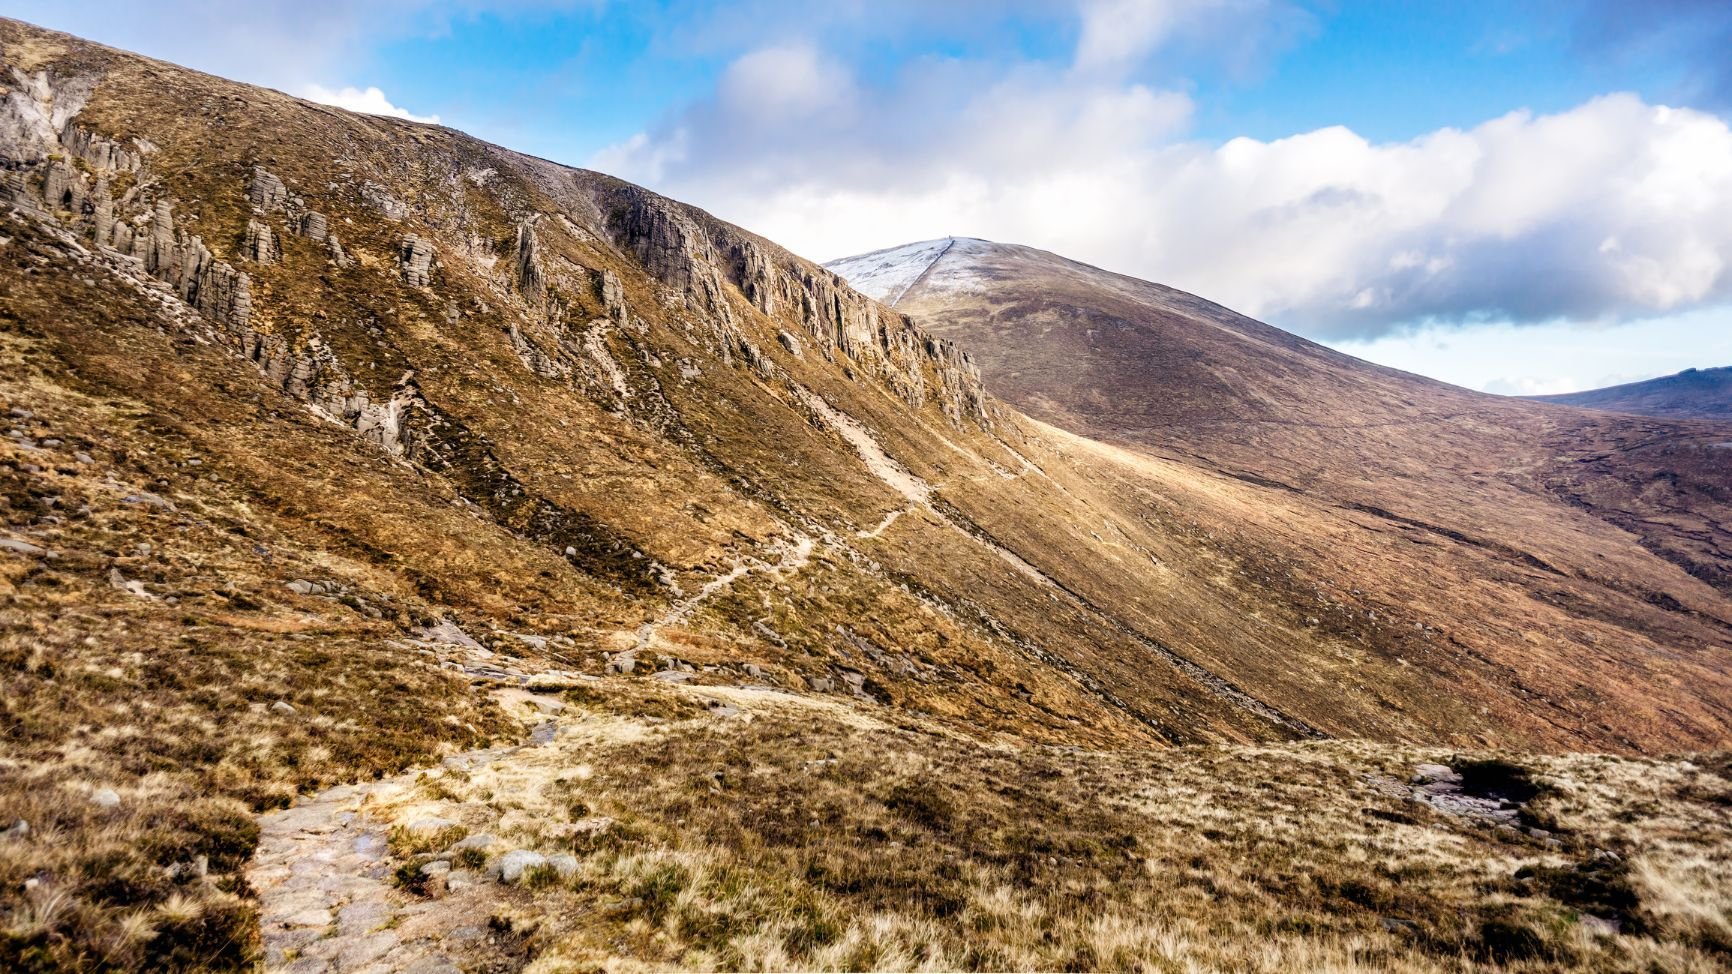 The trail up Slieve Donard, the highest mountain in Northern Ireland, on a sunny day